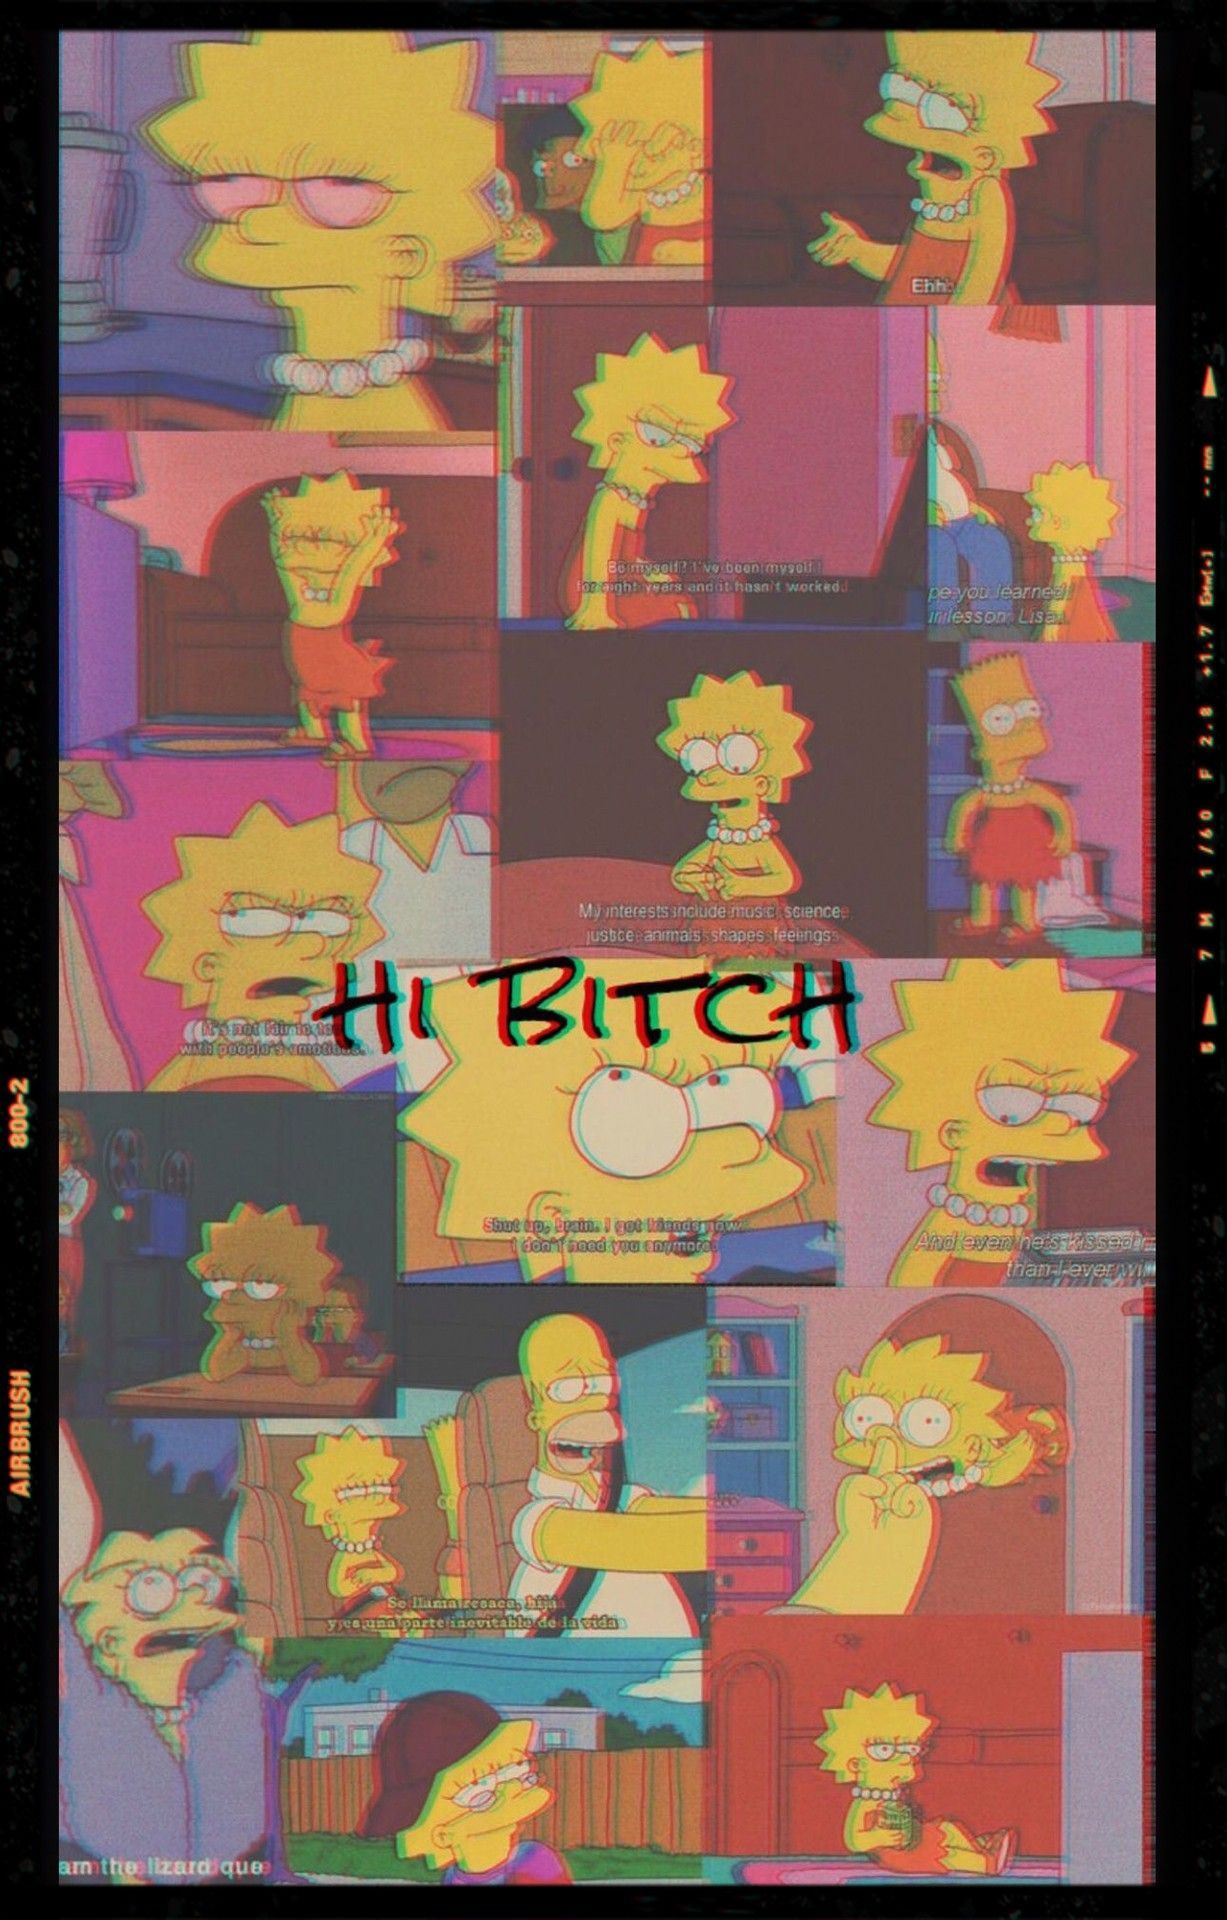 Simpsons Aesthetic. Funny phone